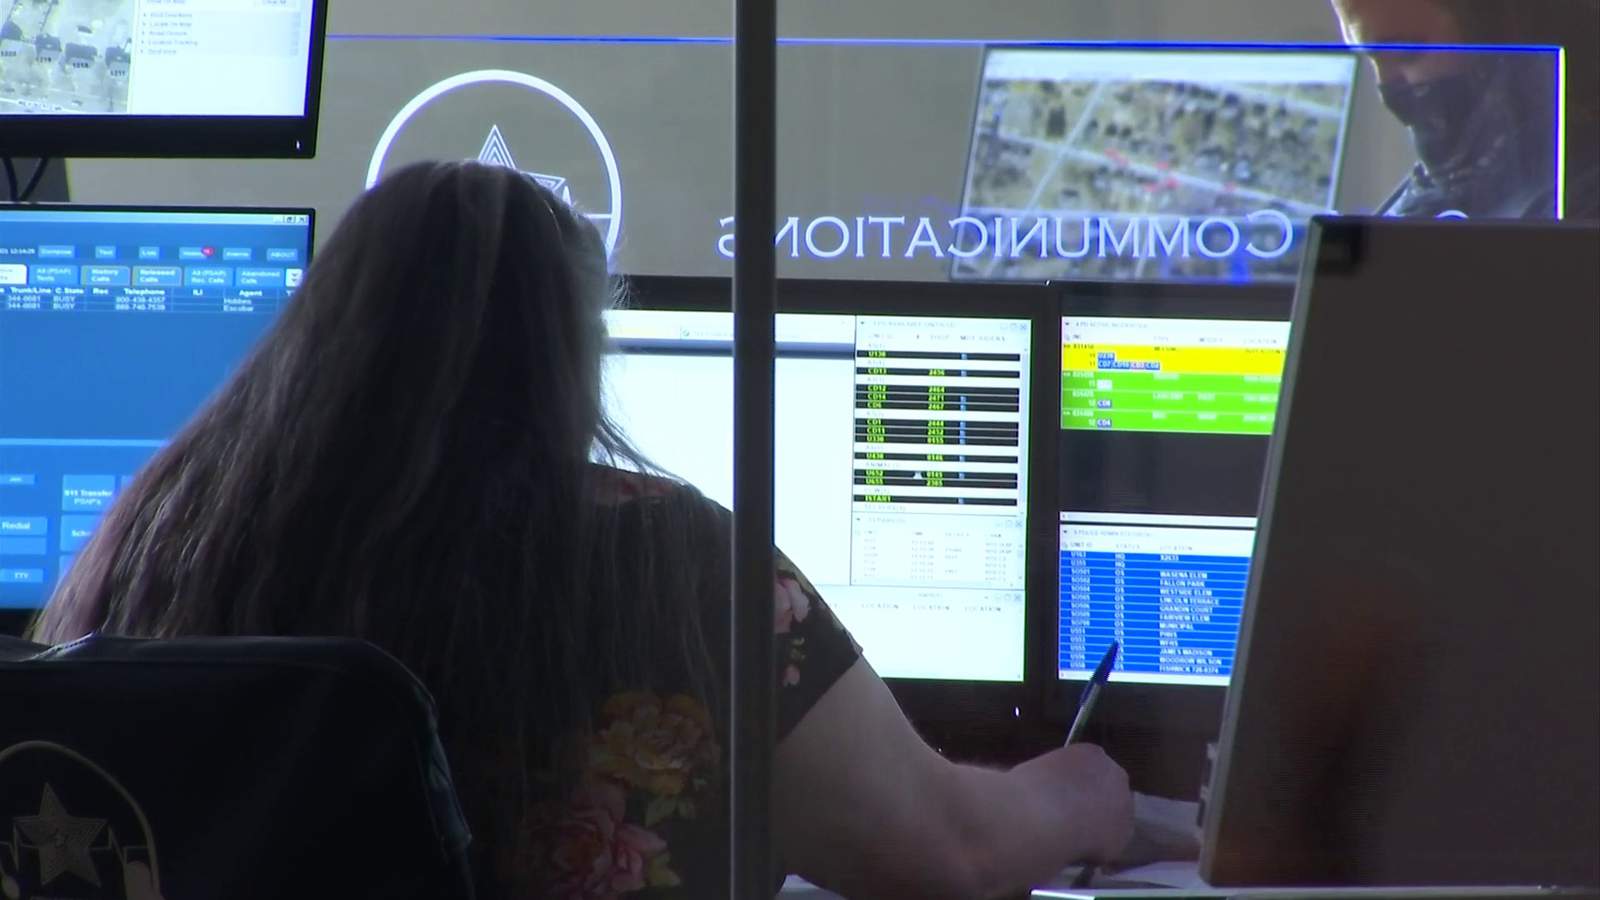 ‘Always trying to help’: Honoring local 911 dispatchers for appreciation week